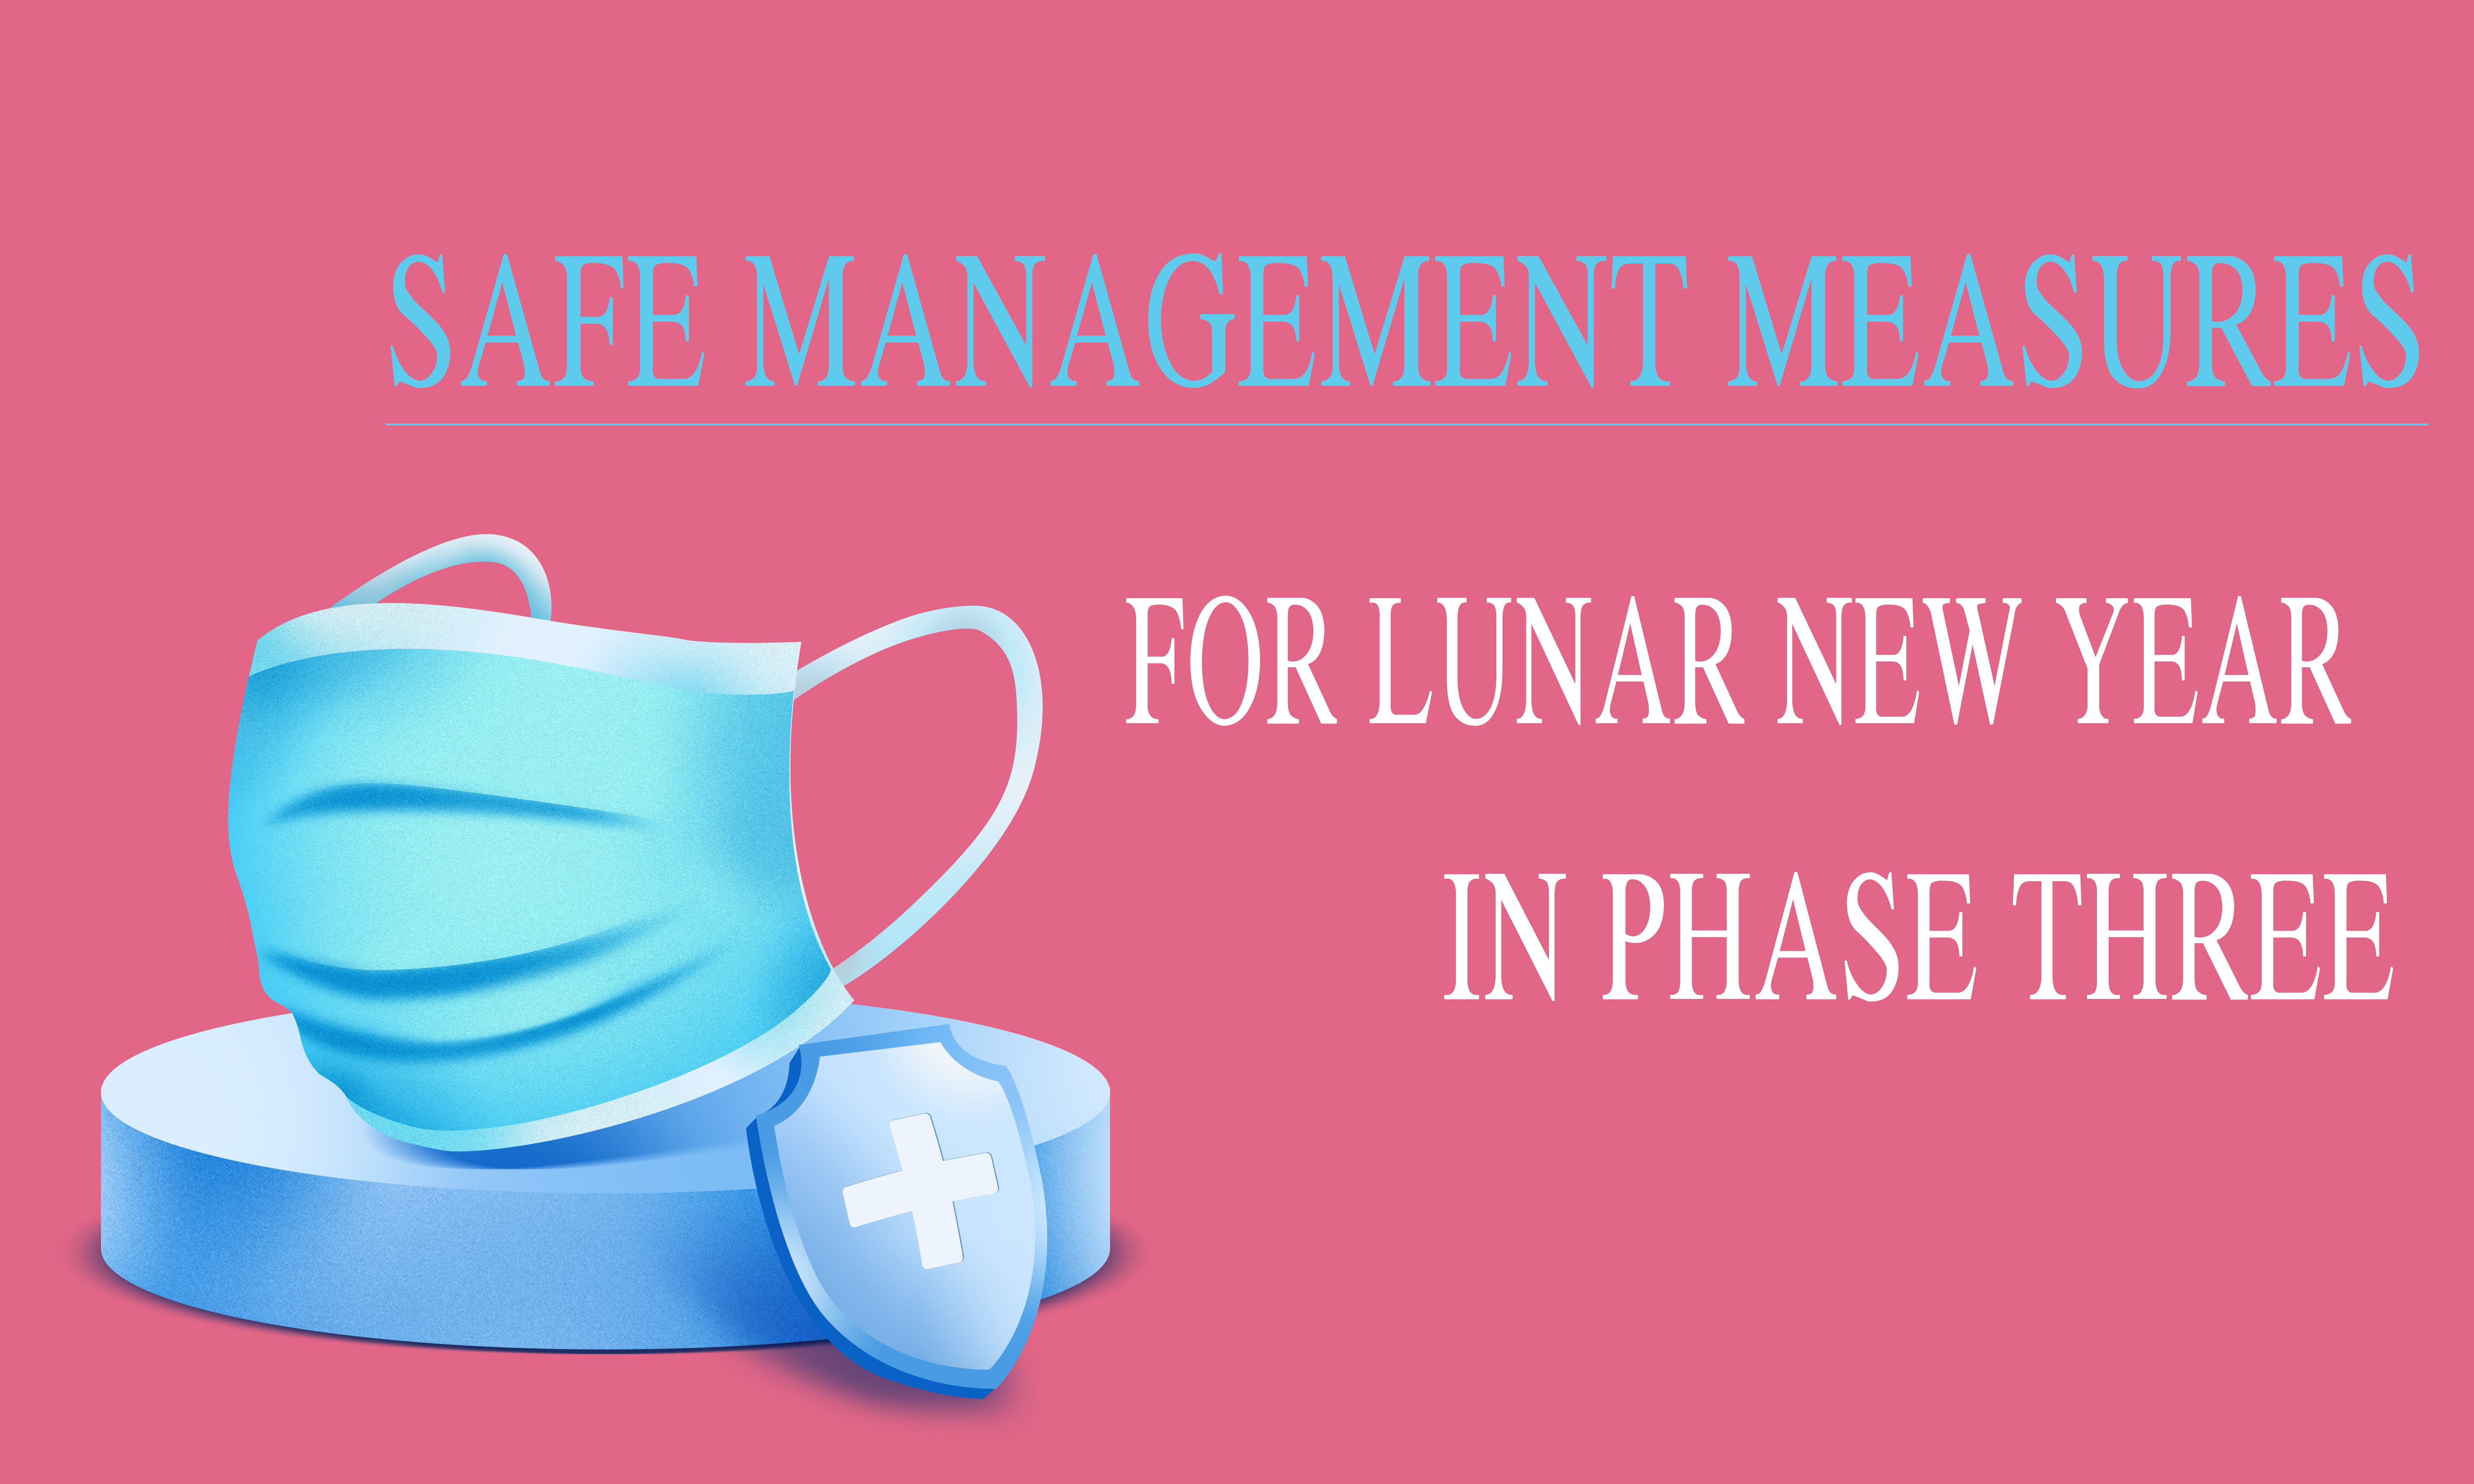 SAFE MANAGEMENT MEASURES  FOR LUNAR NEW YEAR IN PHASE THREE